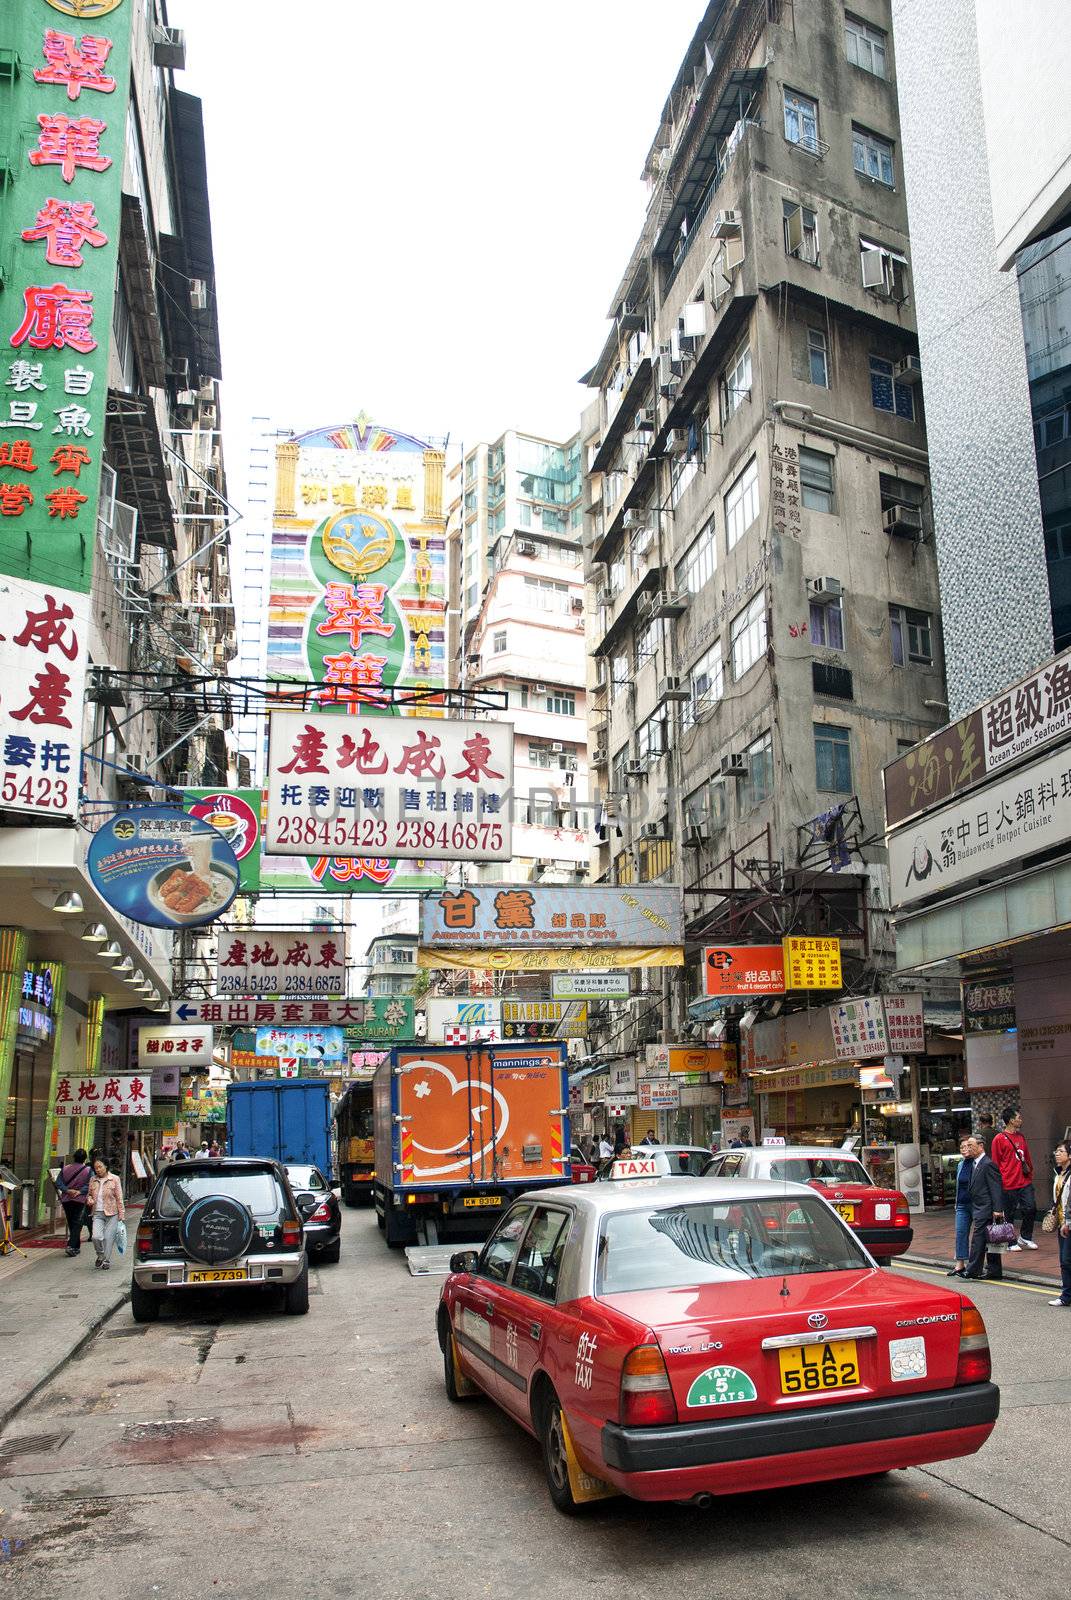 hong kong city center street with taxi by jackmalipan